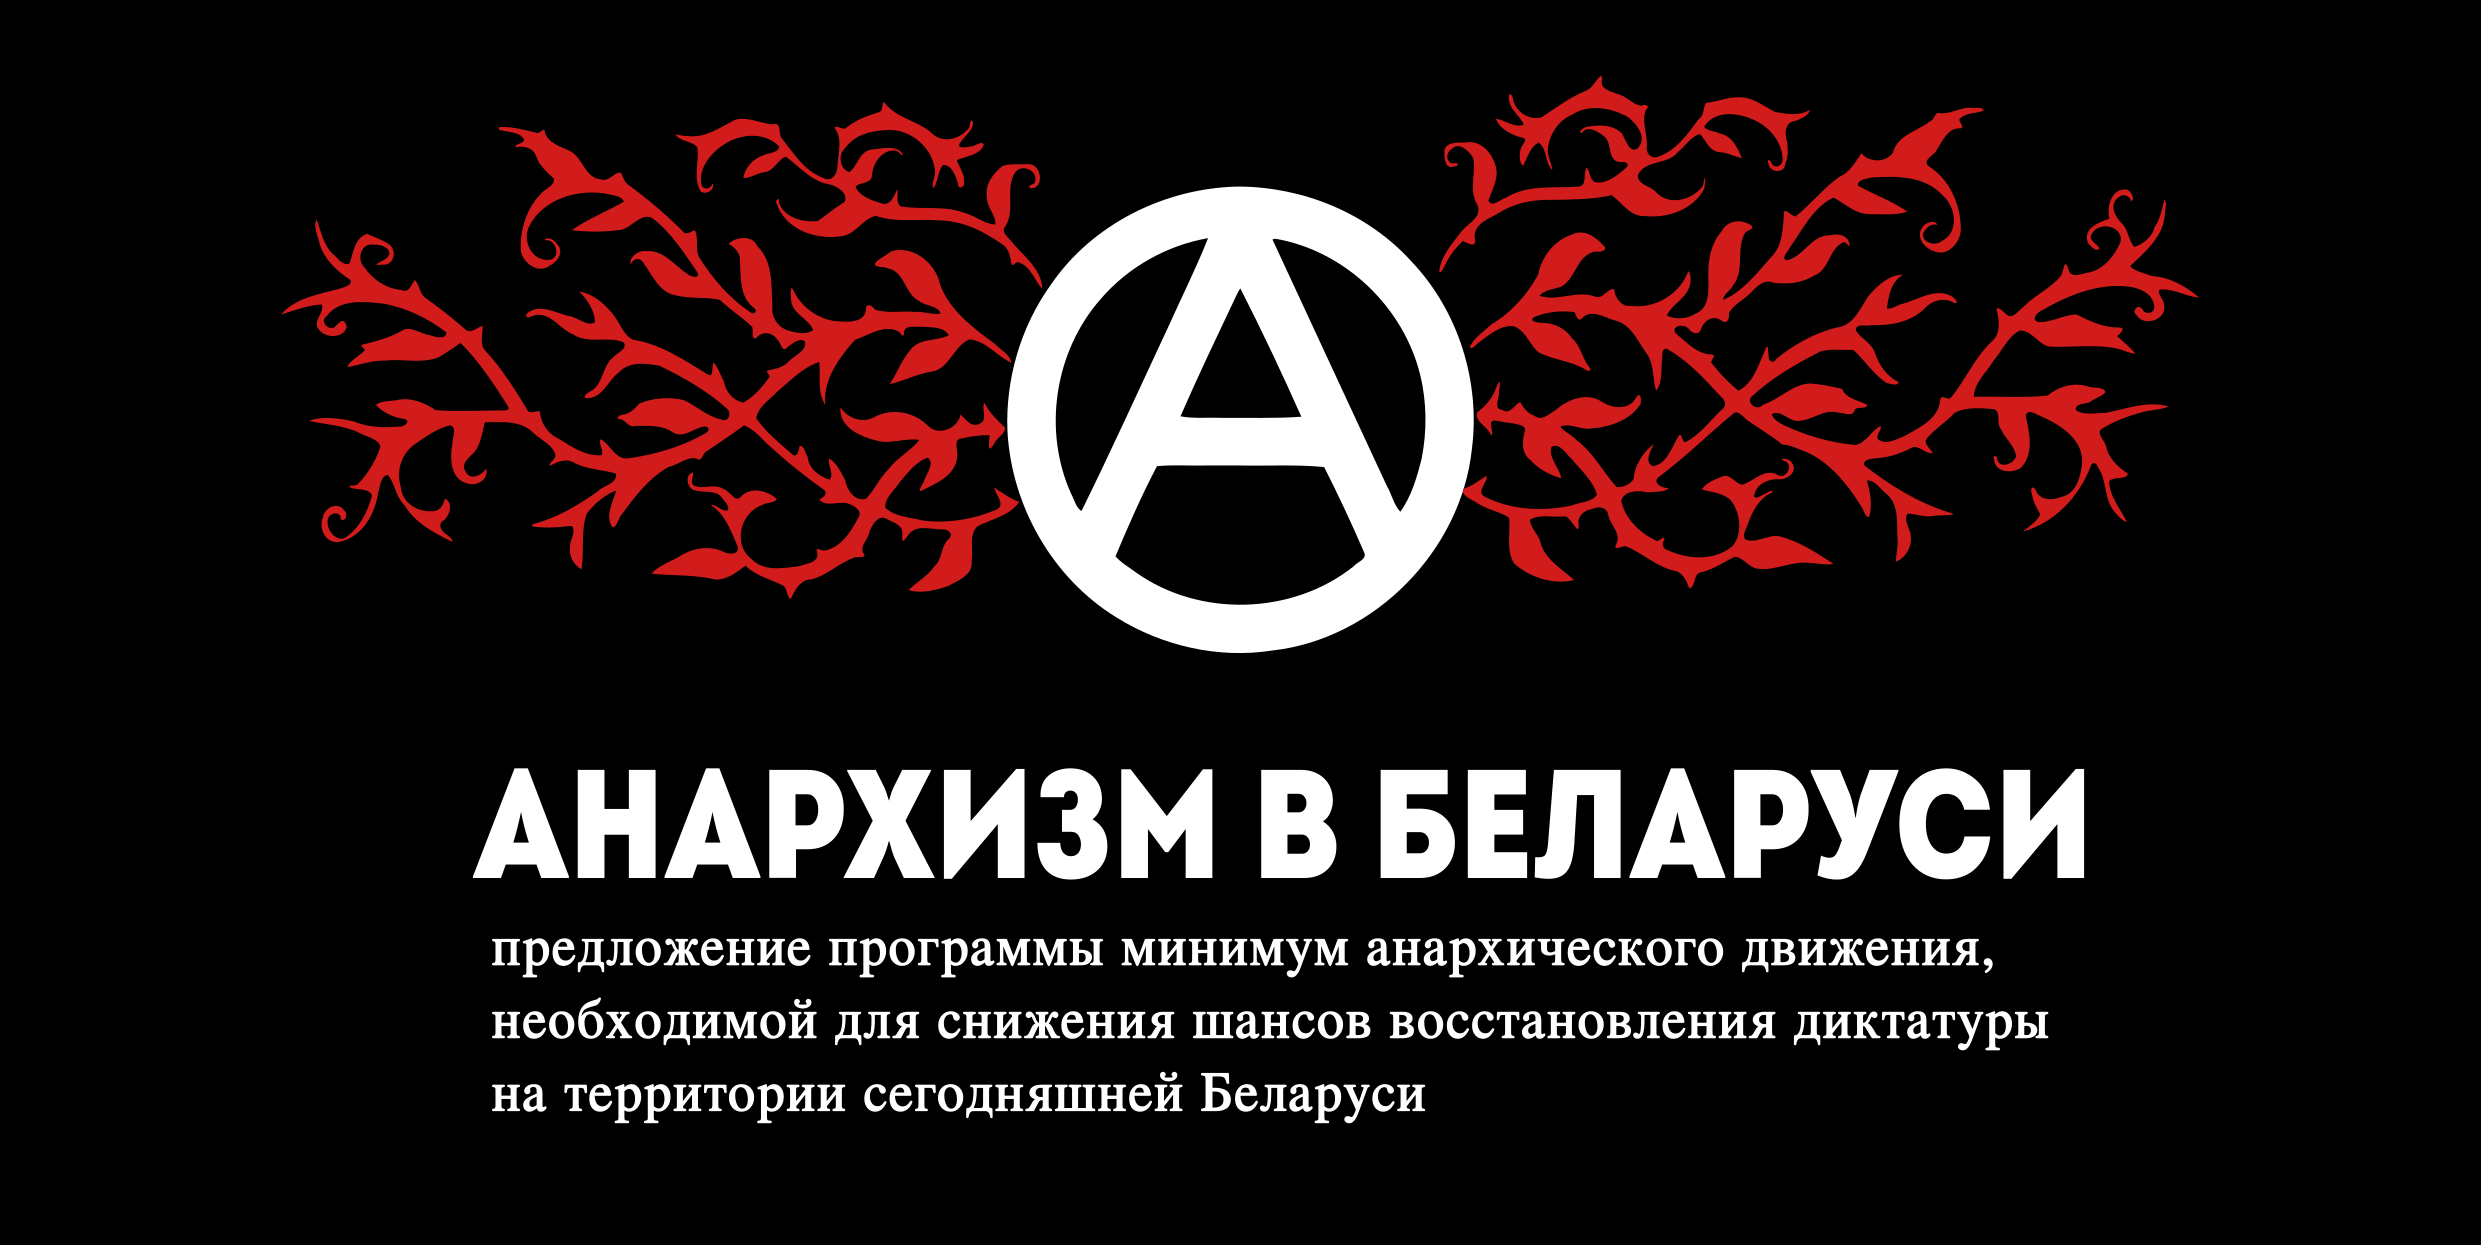 Proposal of program-minimum for the period of uprising in Belarus